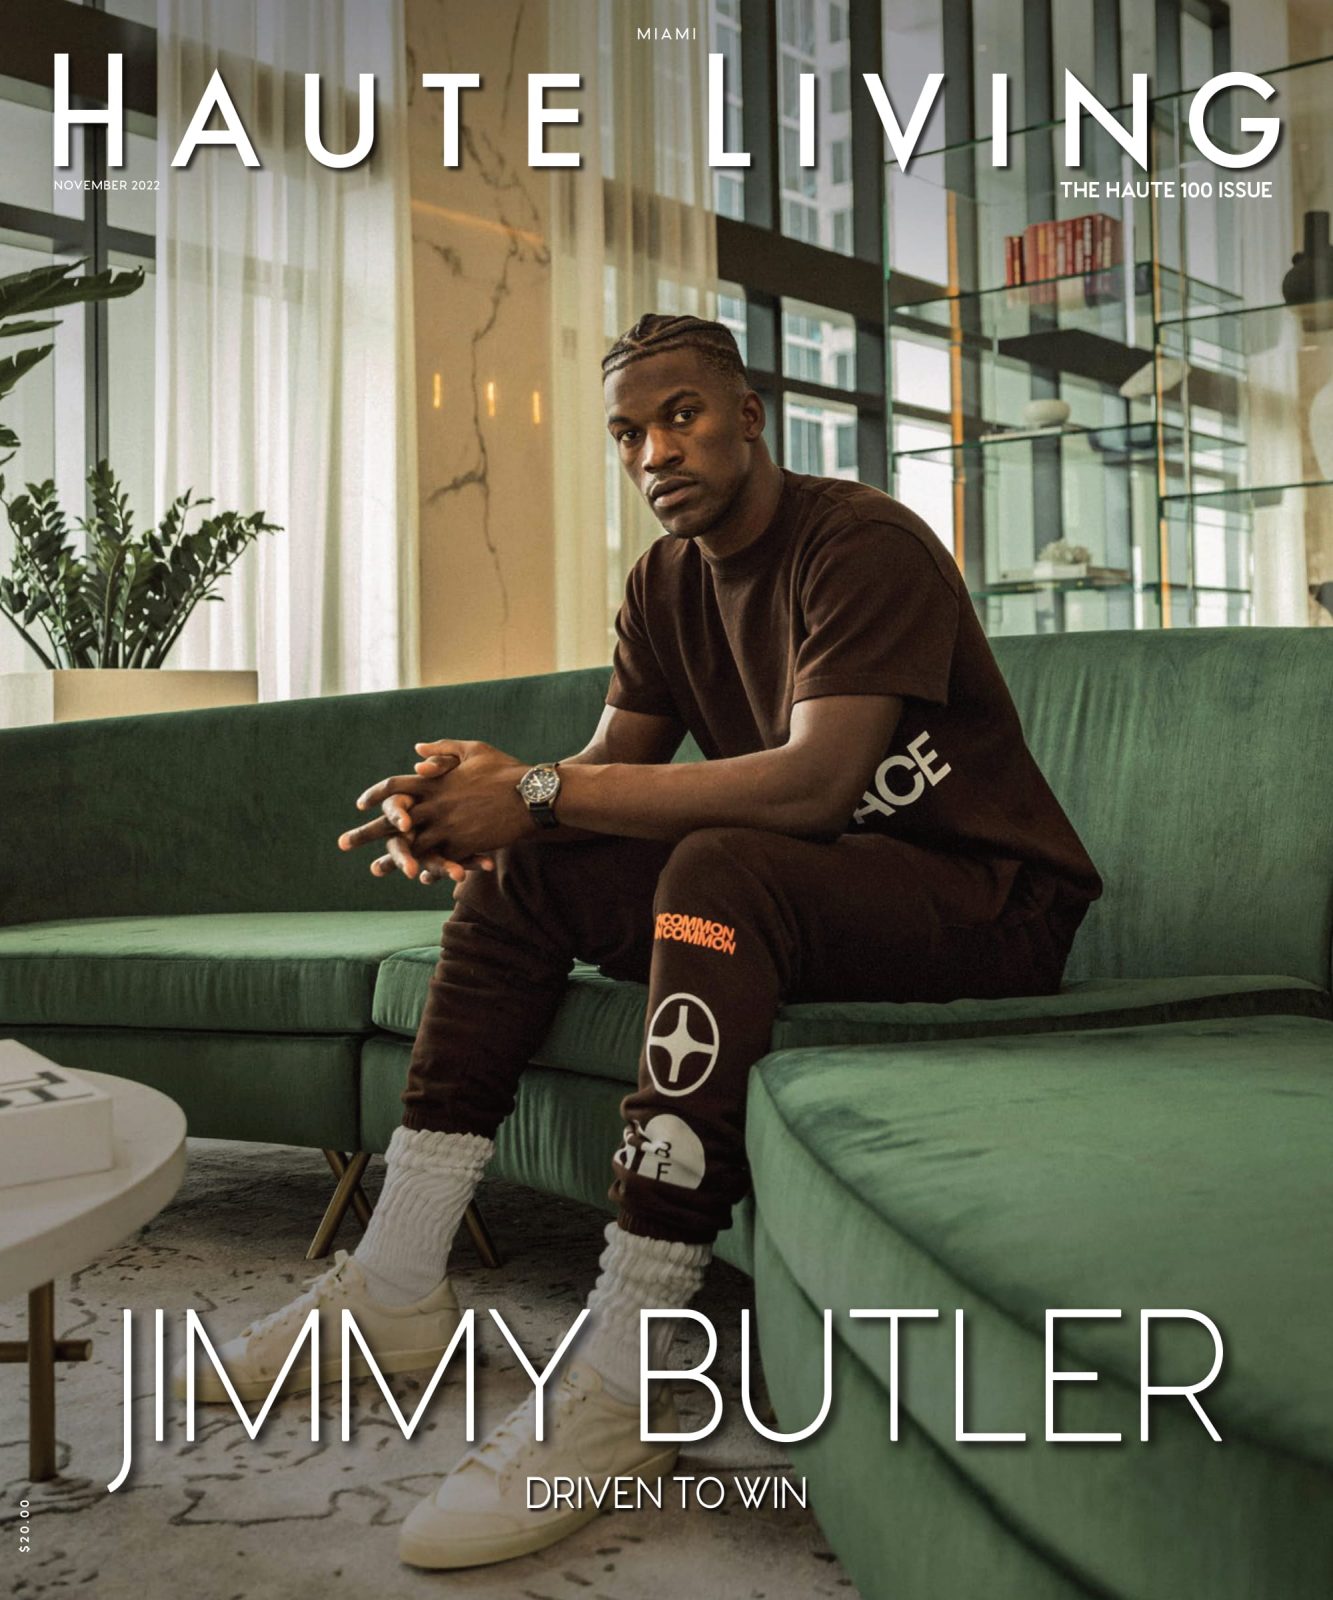 It's Good to Be Jimmy Butler – Chicago Magazine